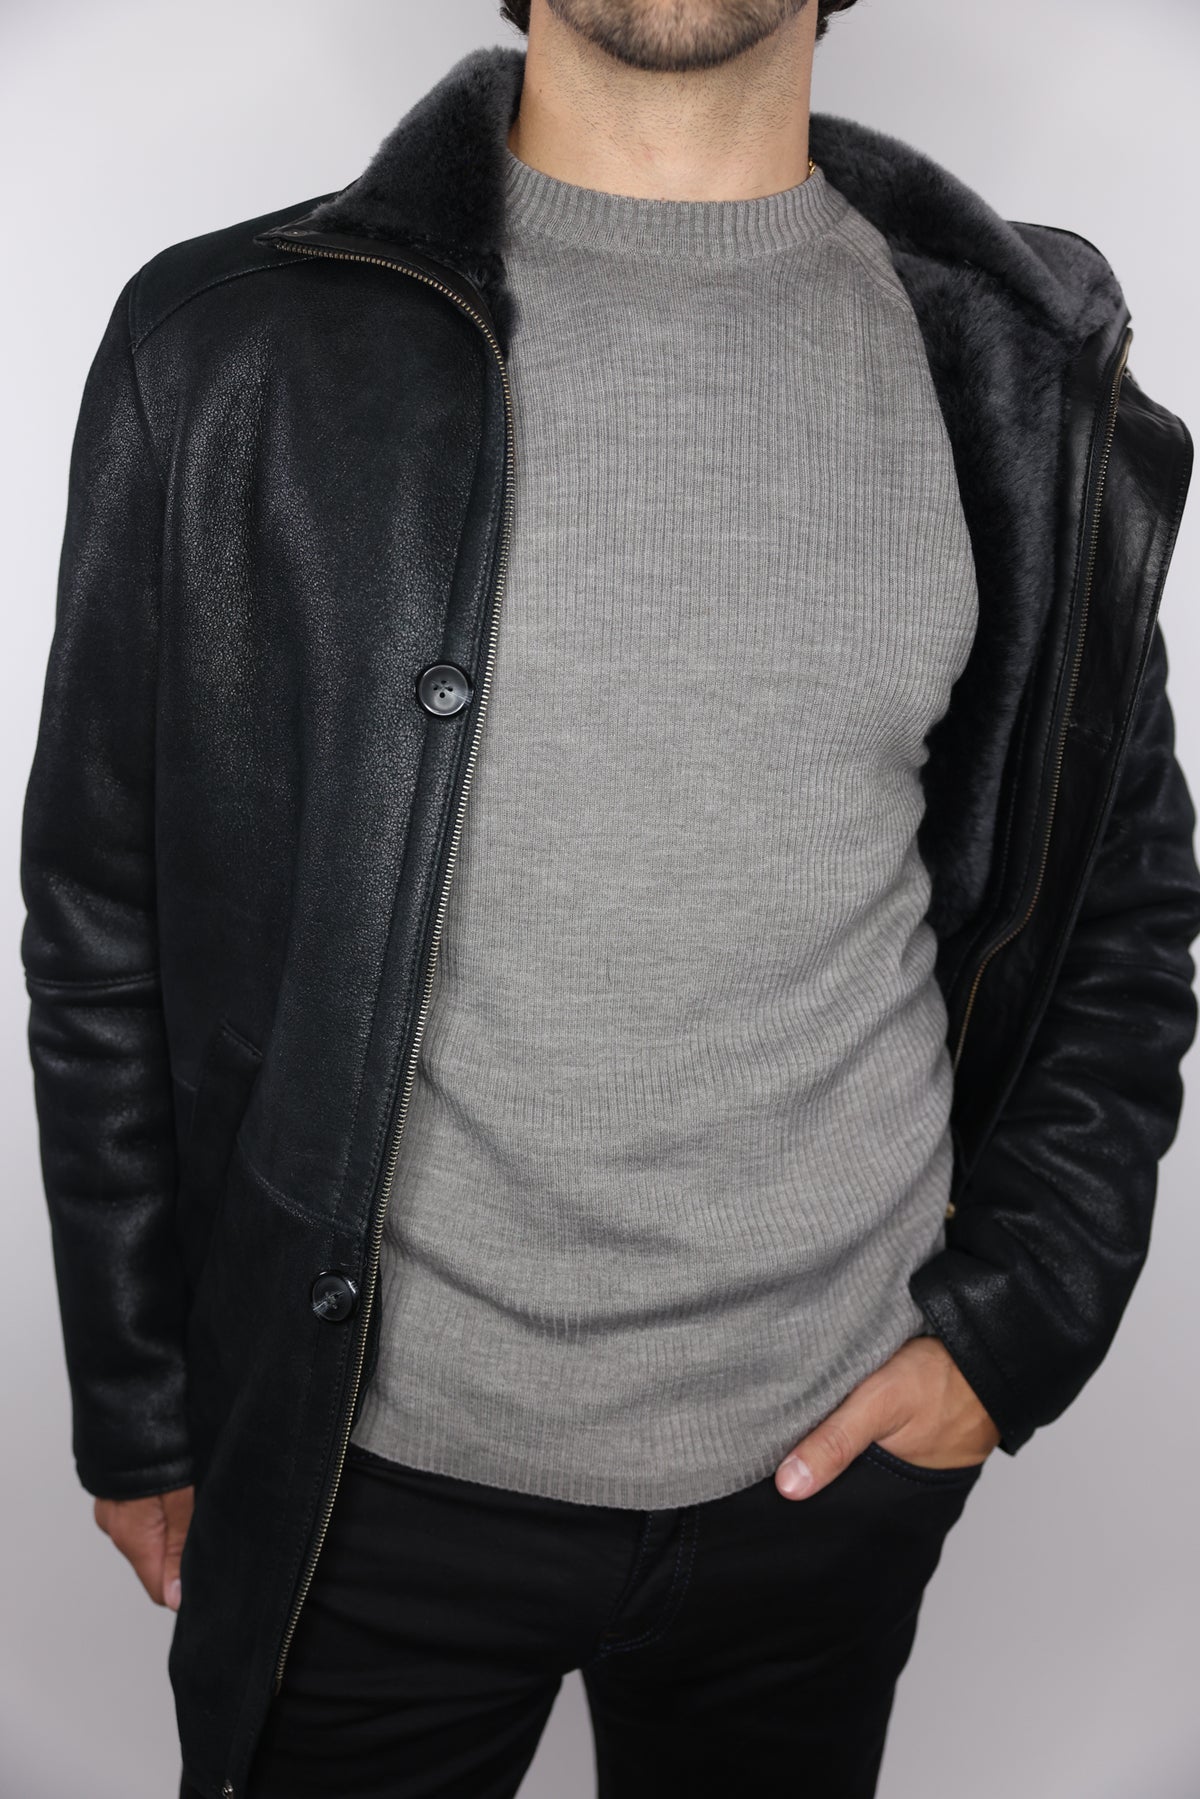 Inpore Leather Shearling Lined Jacket